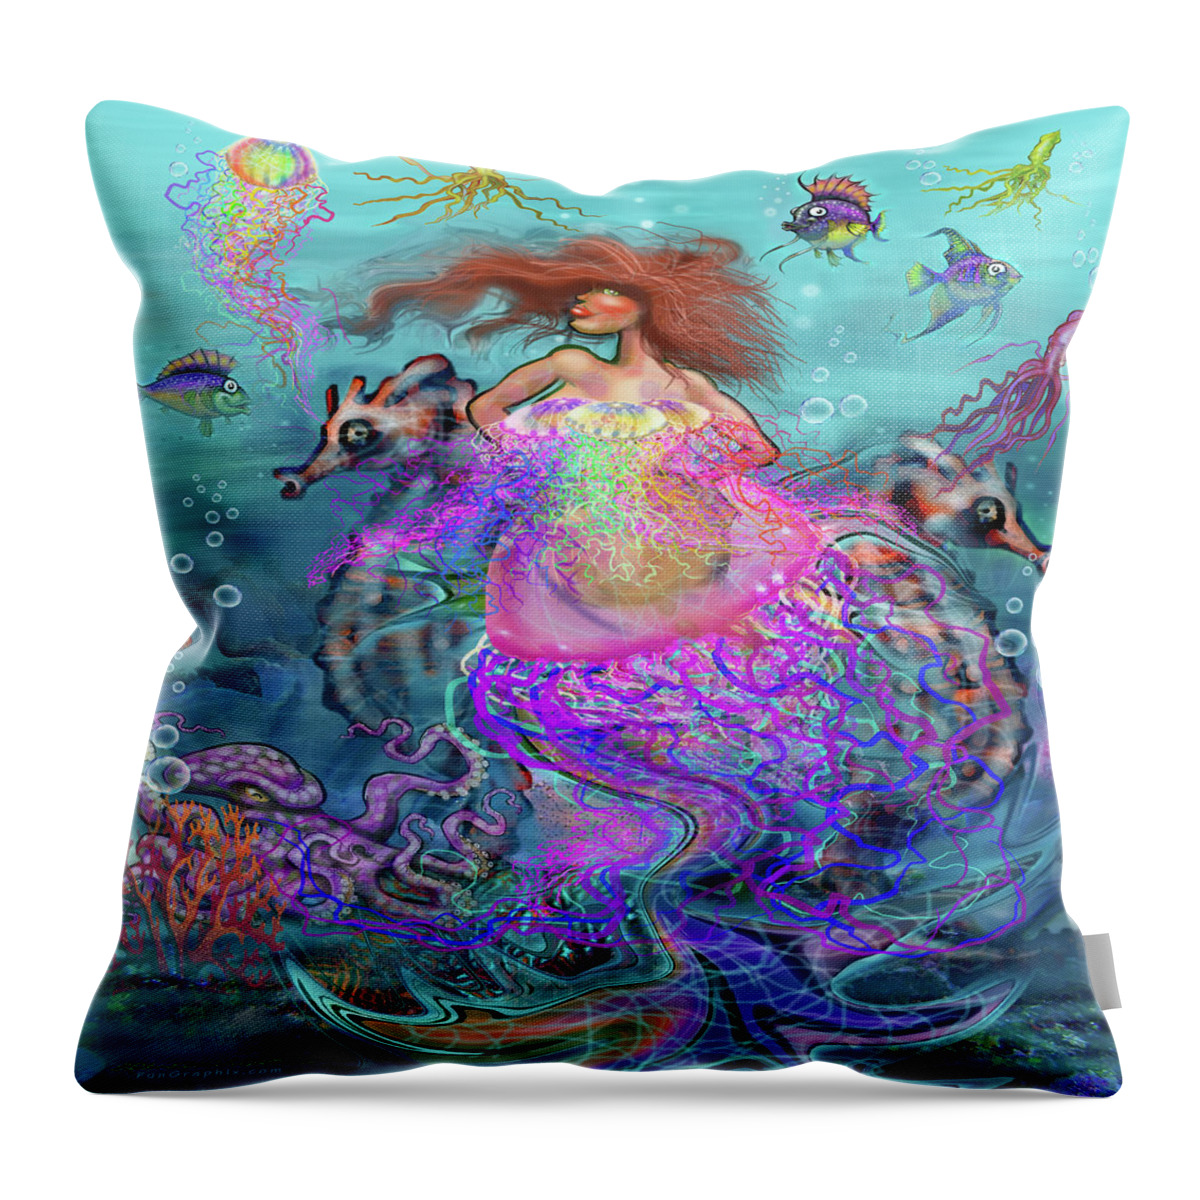 Mermaid Throw Pillow featuring the digital art Mermaid Jellyfish Dress by Kevin Middleton